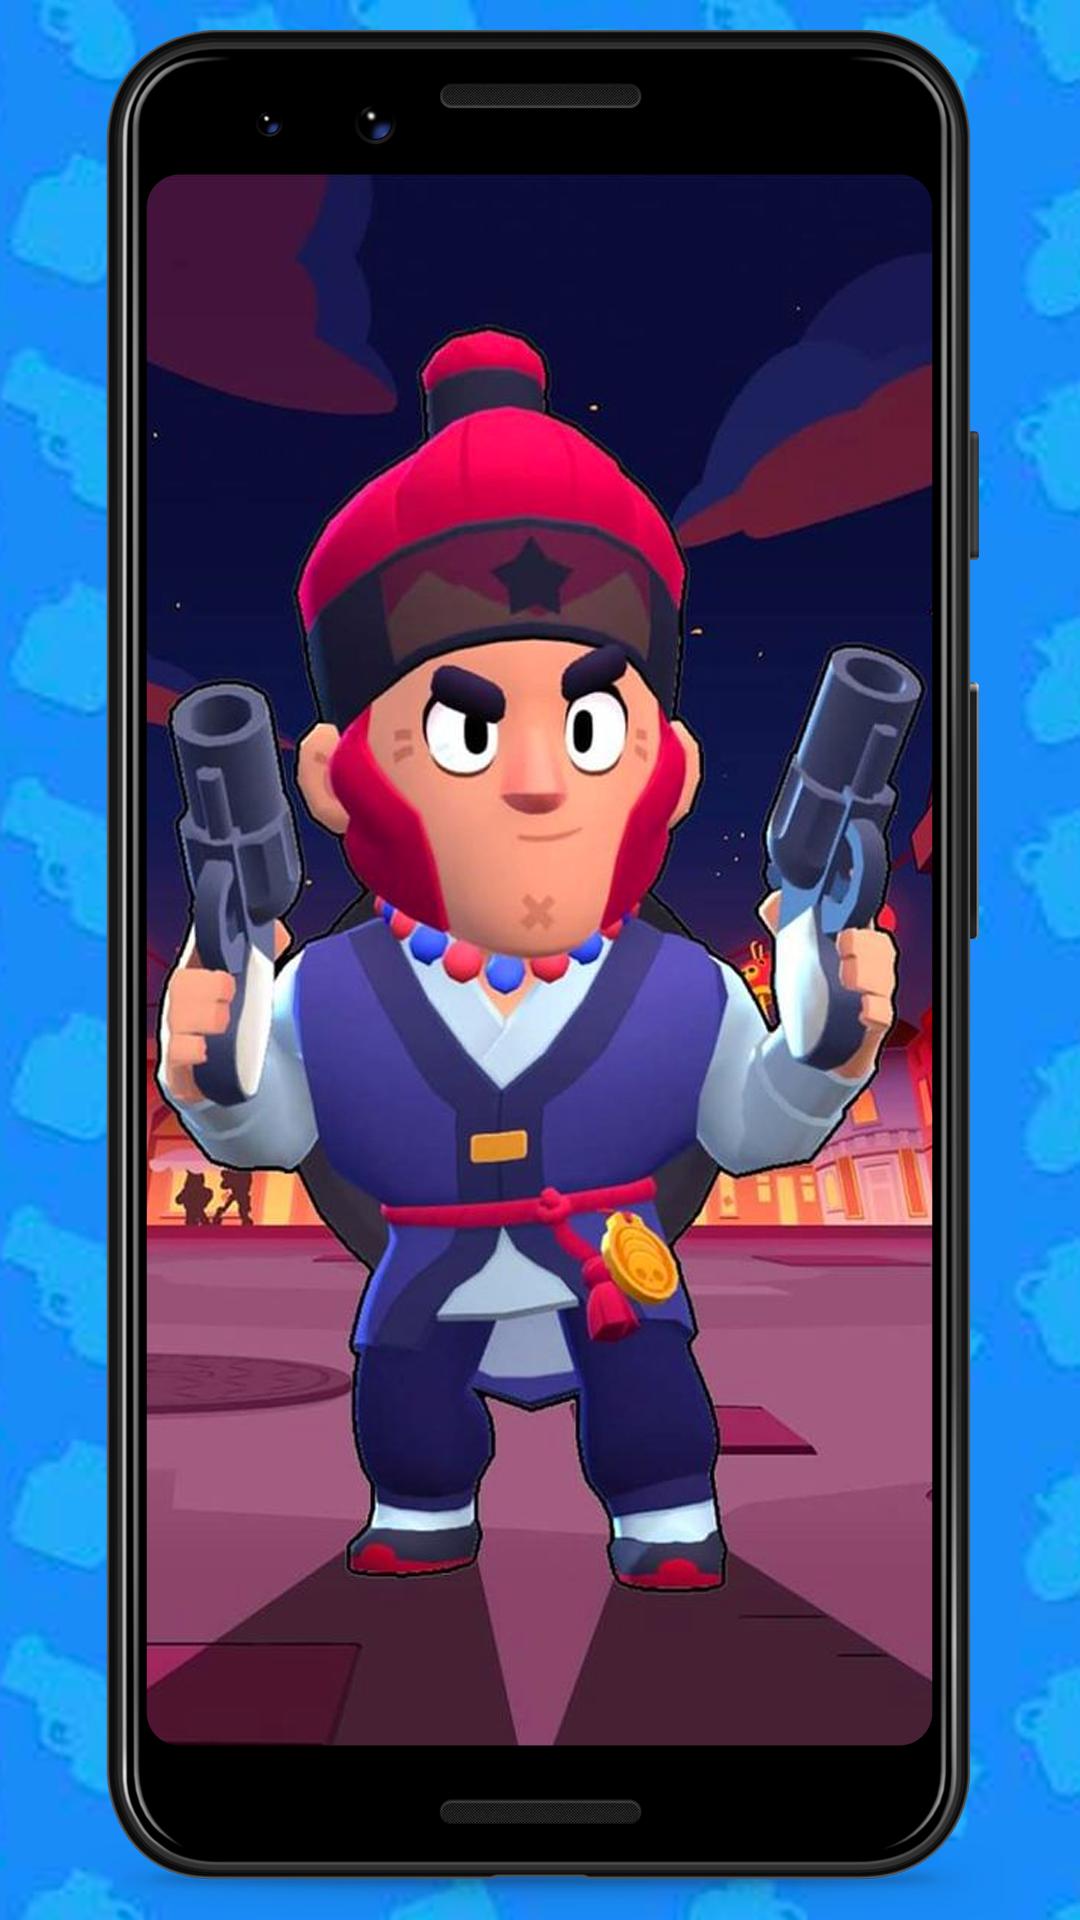 Wallpapers Hd For Brawl Stats For Android Apk Download - dibujos epicos de brawl stars